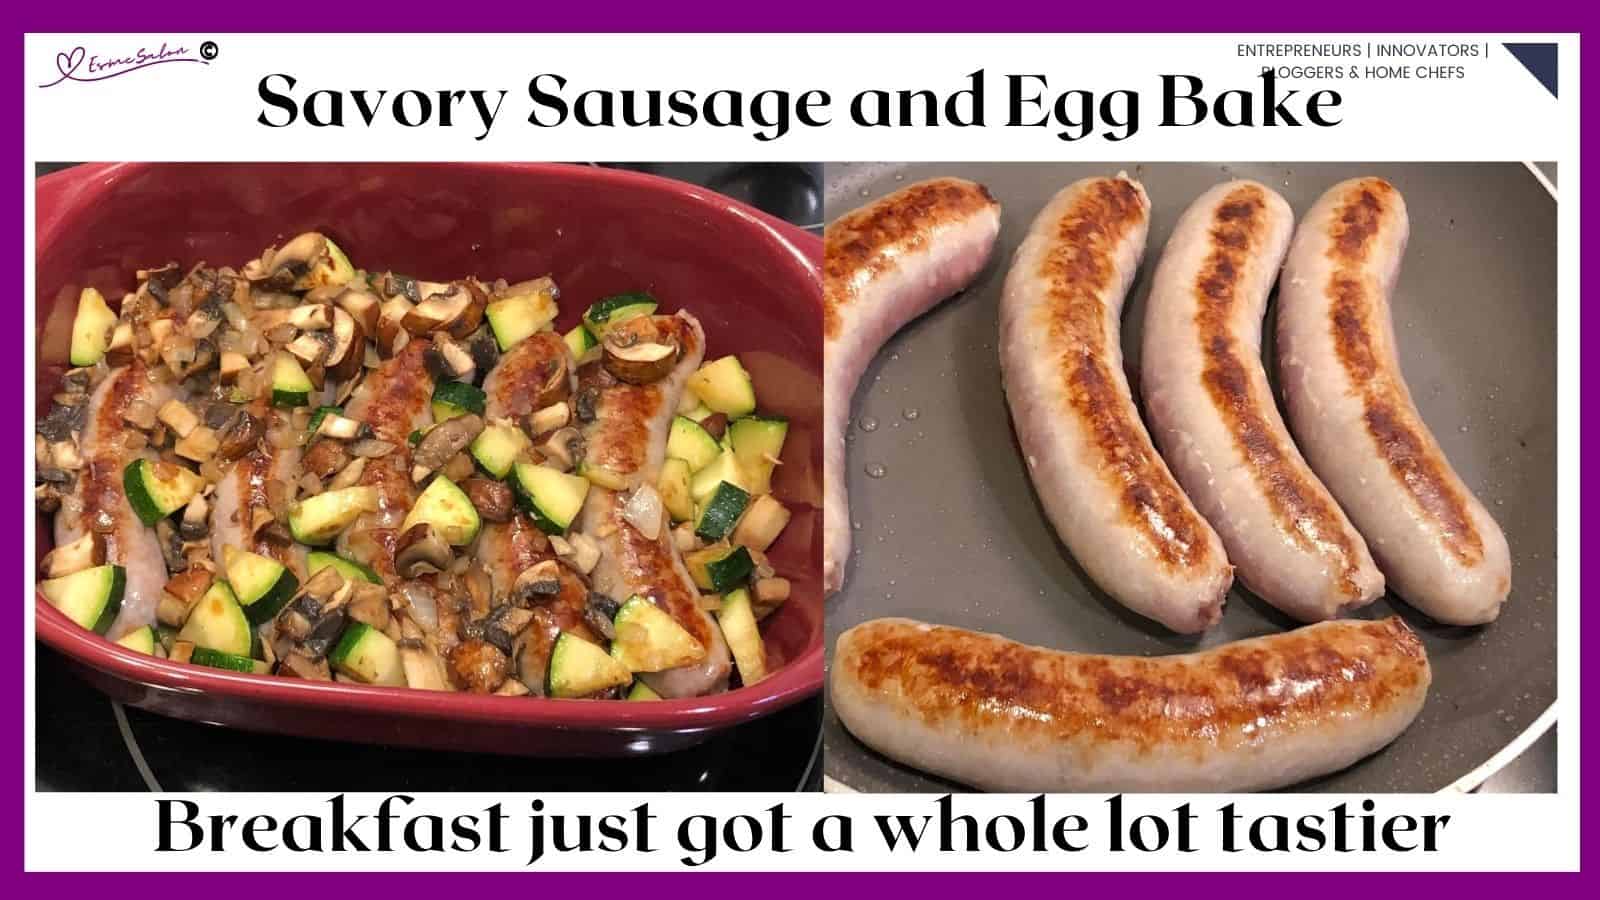 an image of a red oblong dish with Sausage Egg Bake and links of sausage